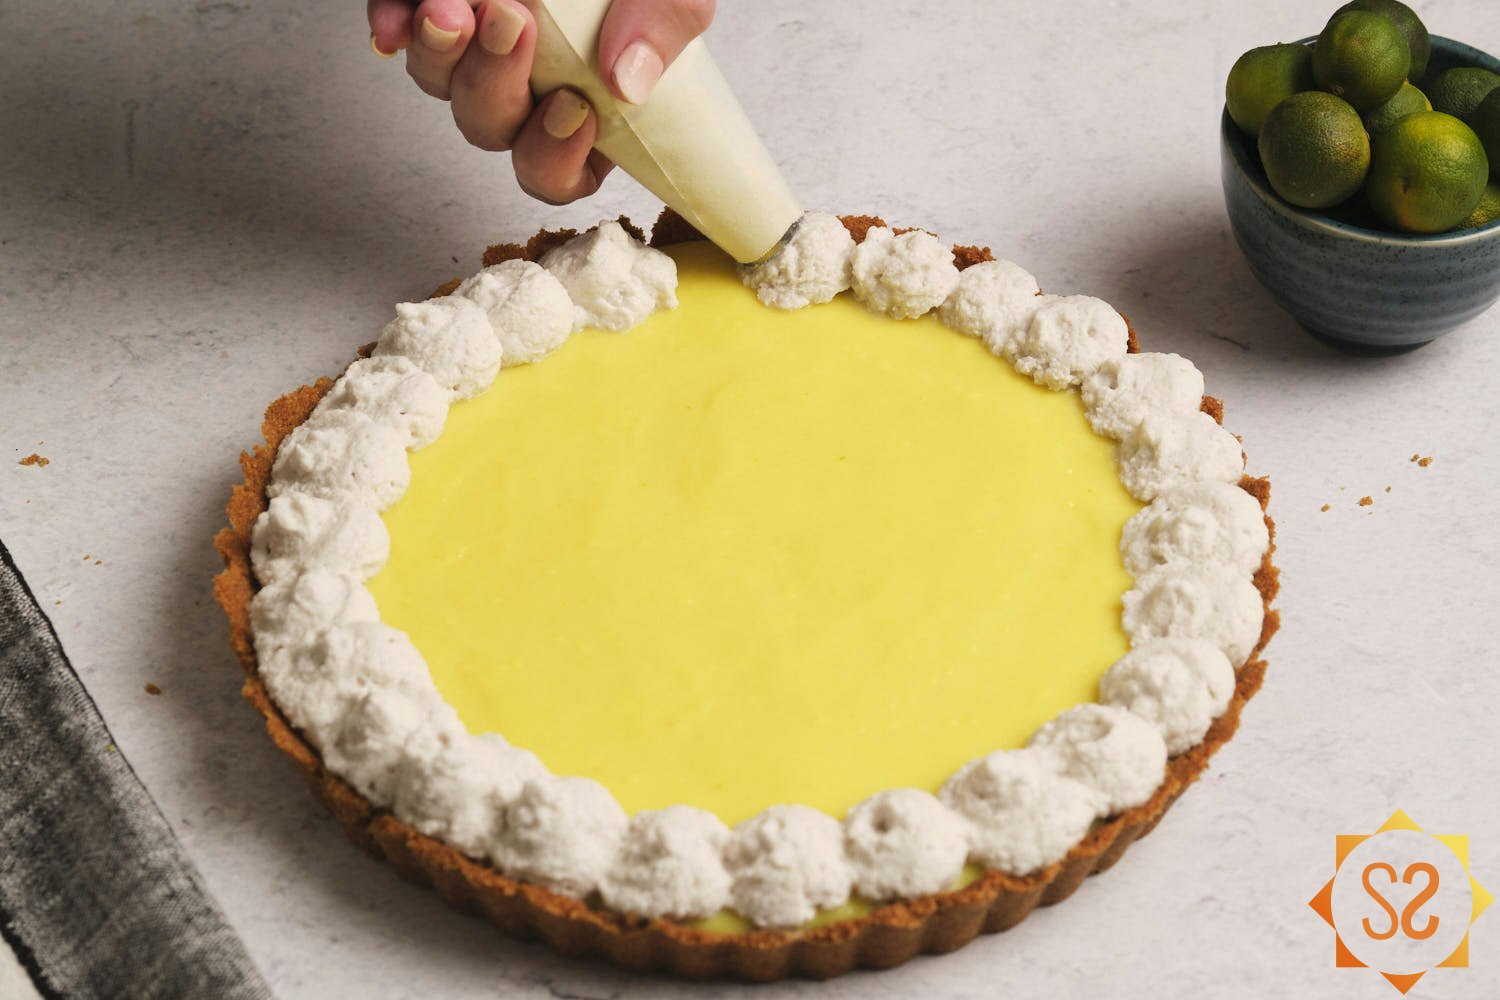 An image of hands piping vegan whipped cream onto a finished vegan Key lime pie, with a bowl of Key limes to the side.